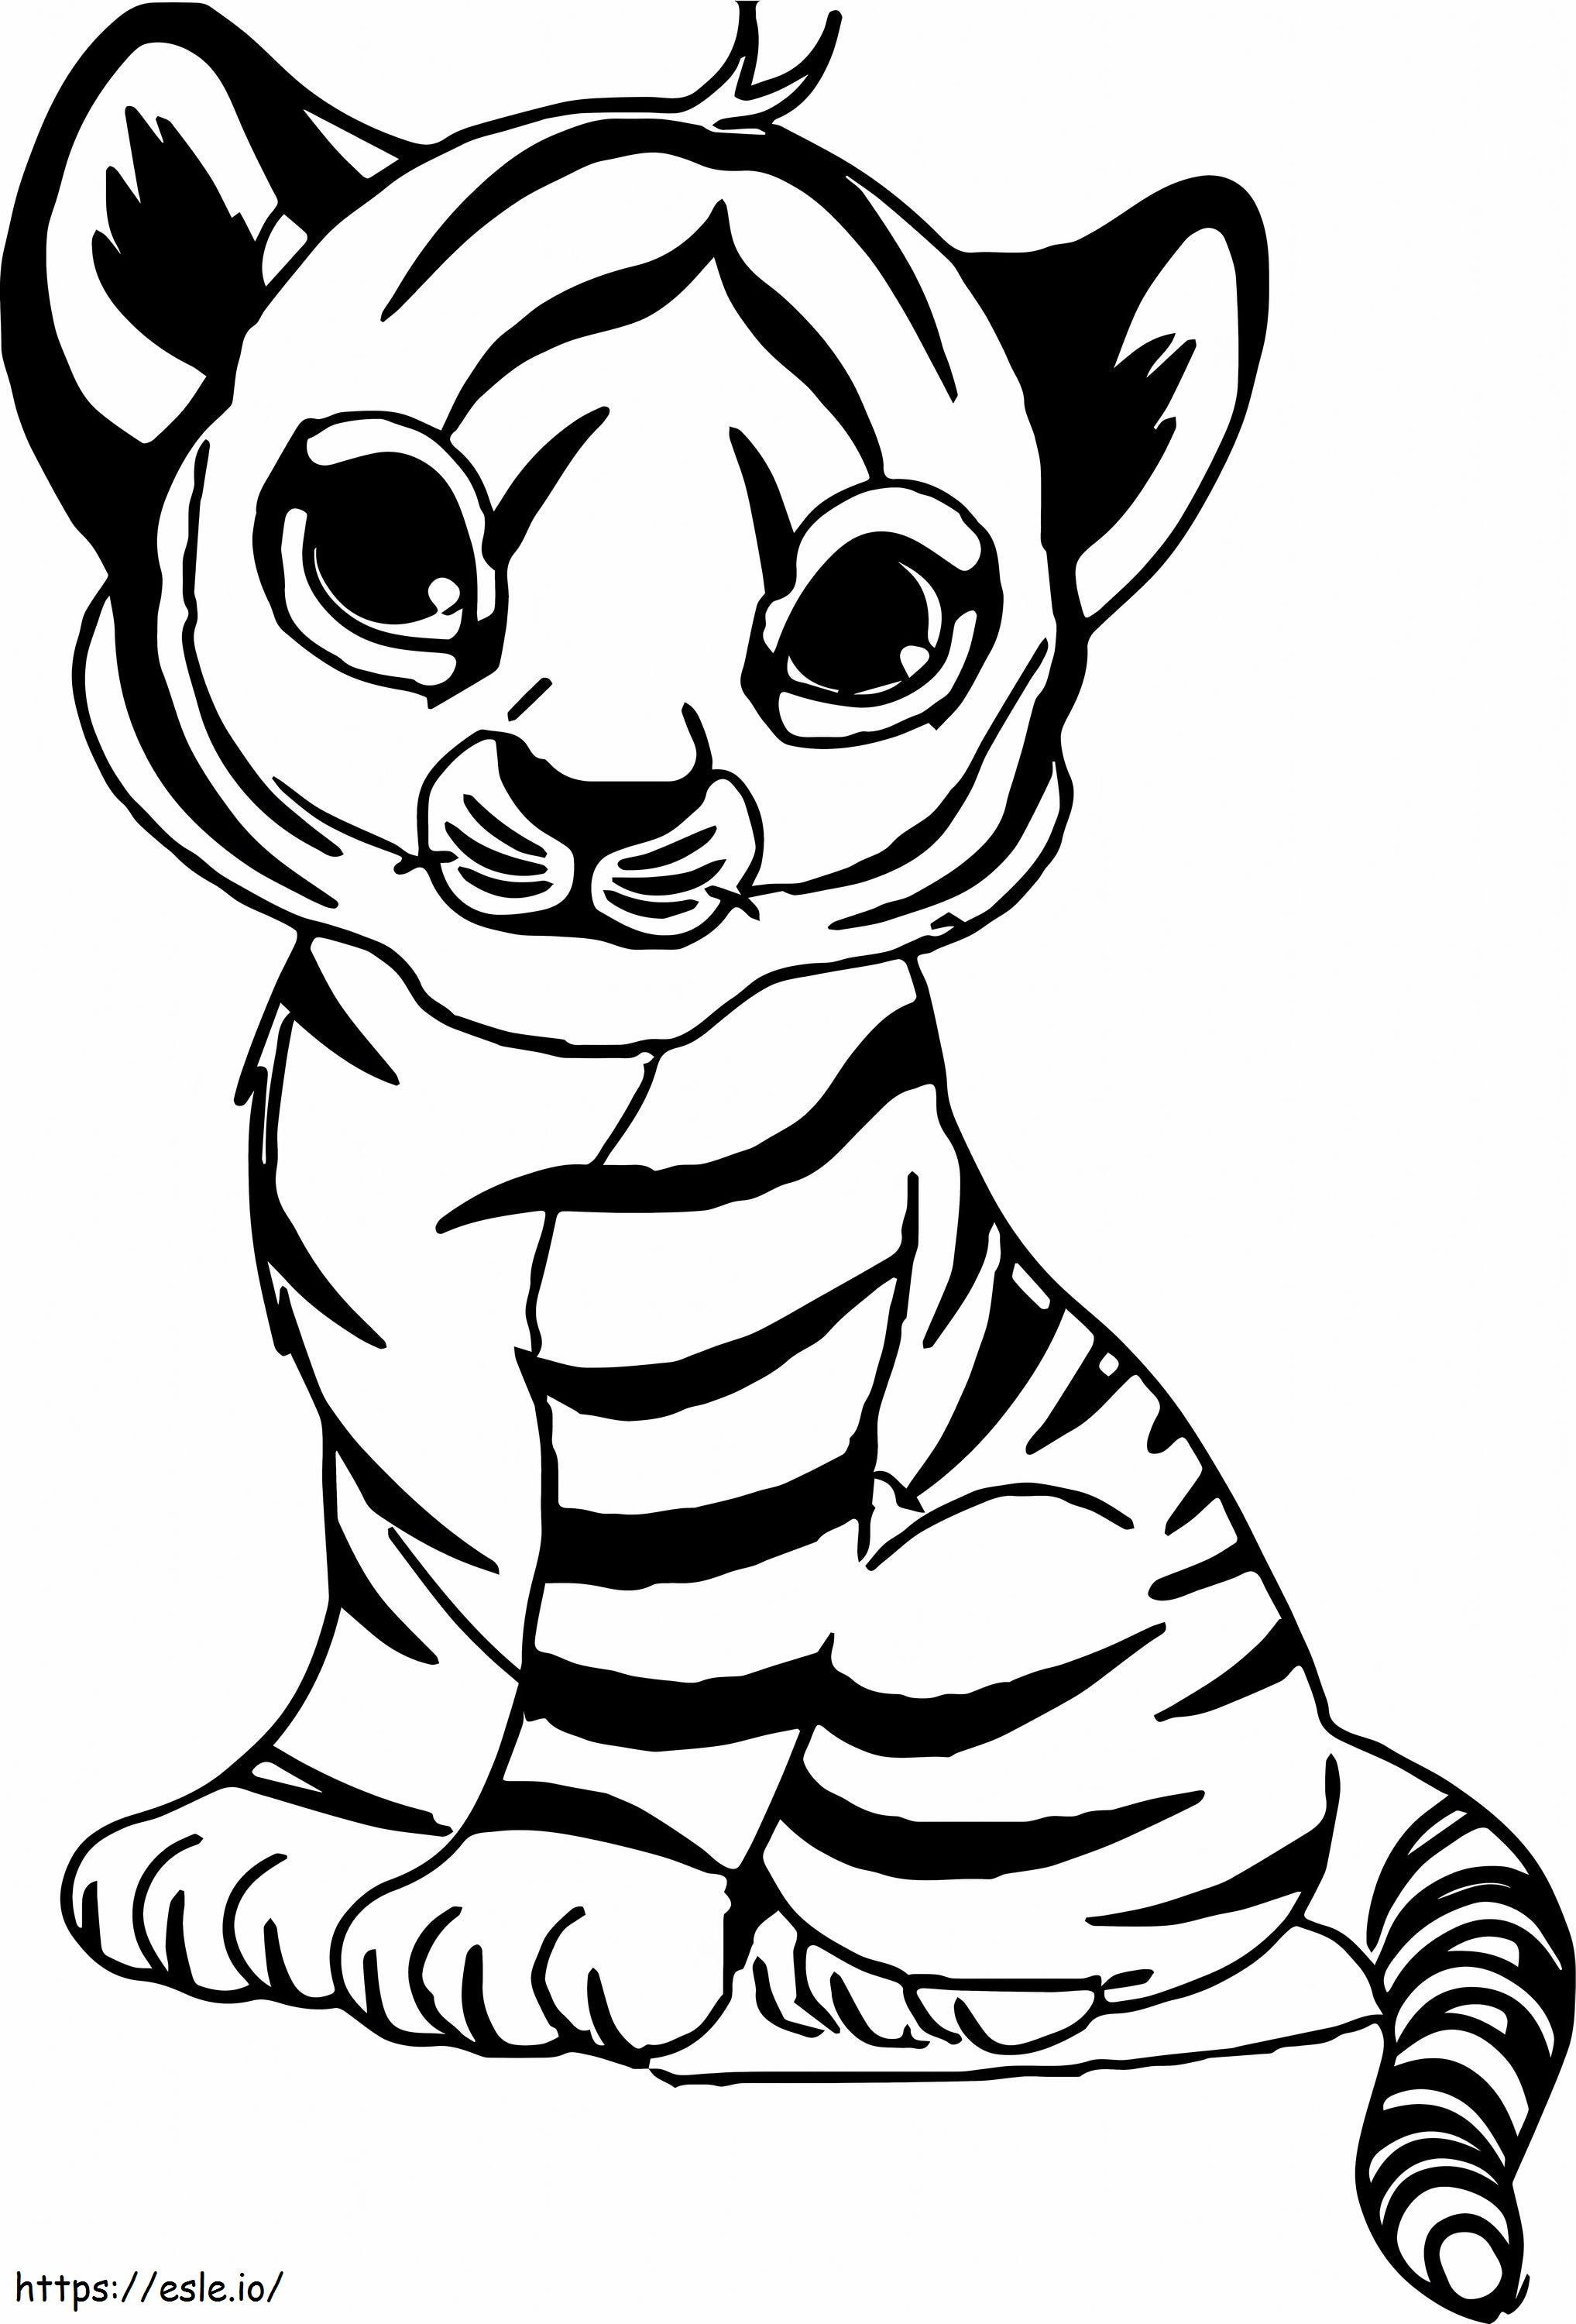 Coloriage  Cute Baby Tiger Gallery 7 F Coloring Pages Page And 1695C2972499 23 At Cute Baby Tiger à imprimer dessin